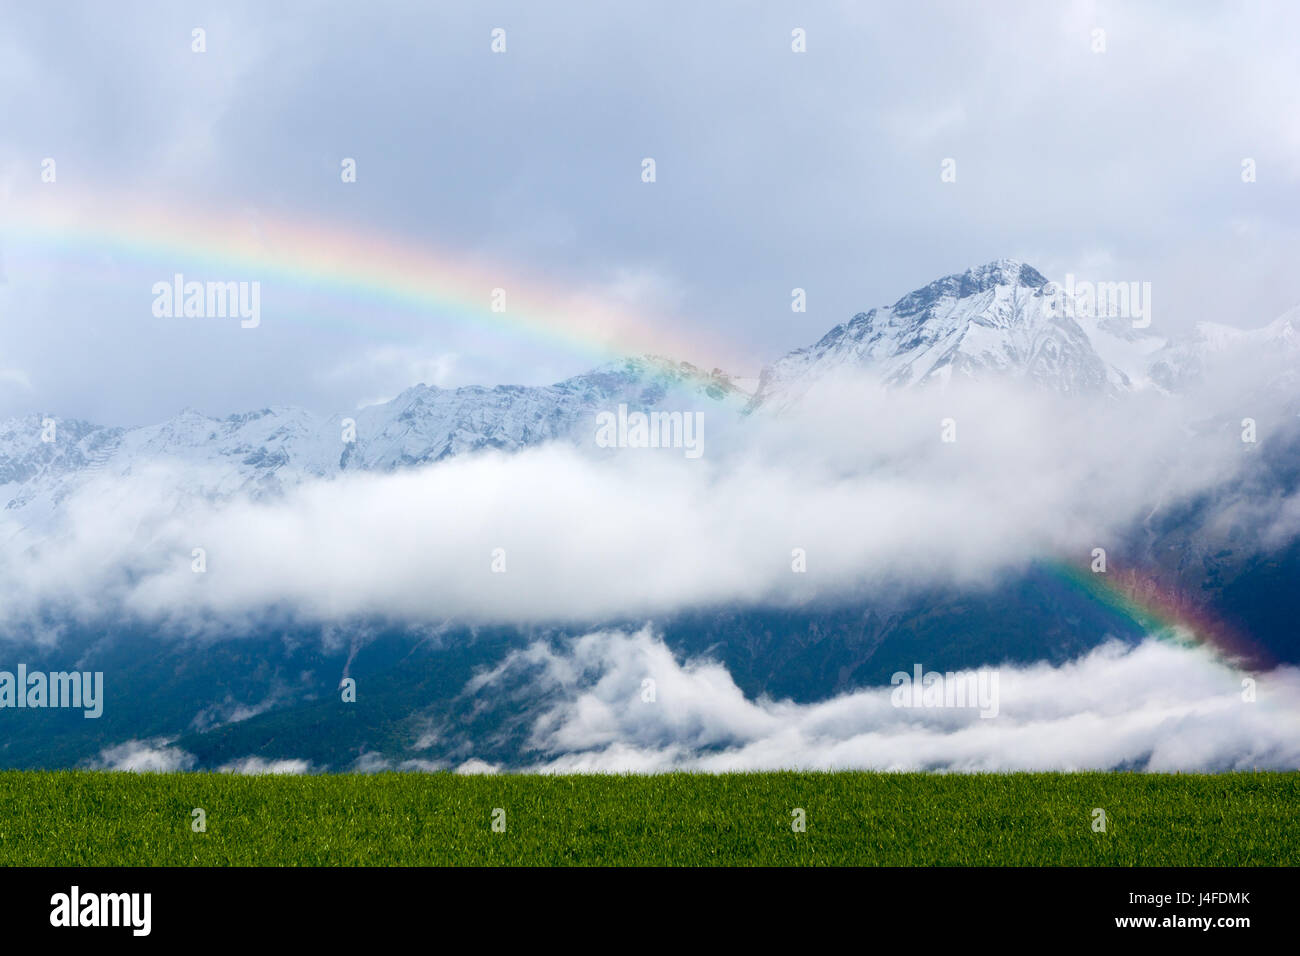 Rainbow over a green meadow in the Alps, with snowcapped hills in the background. Stock Photo